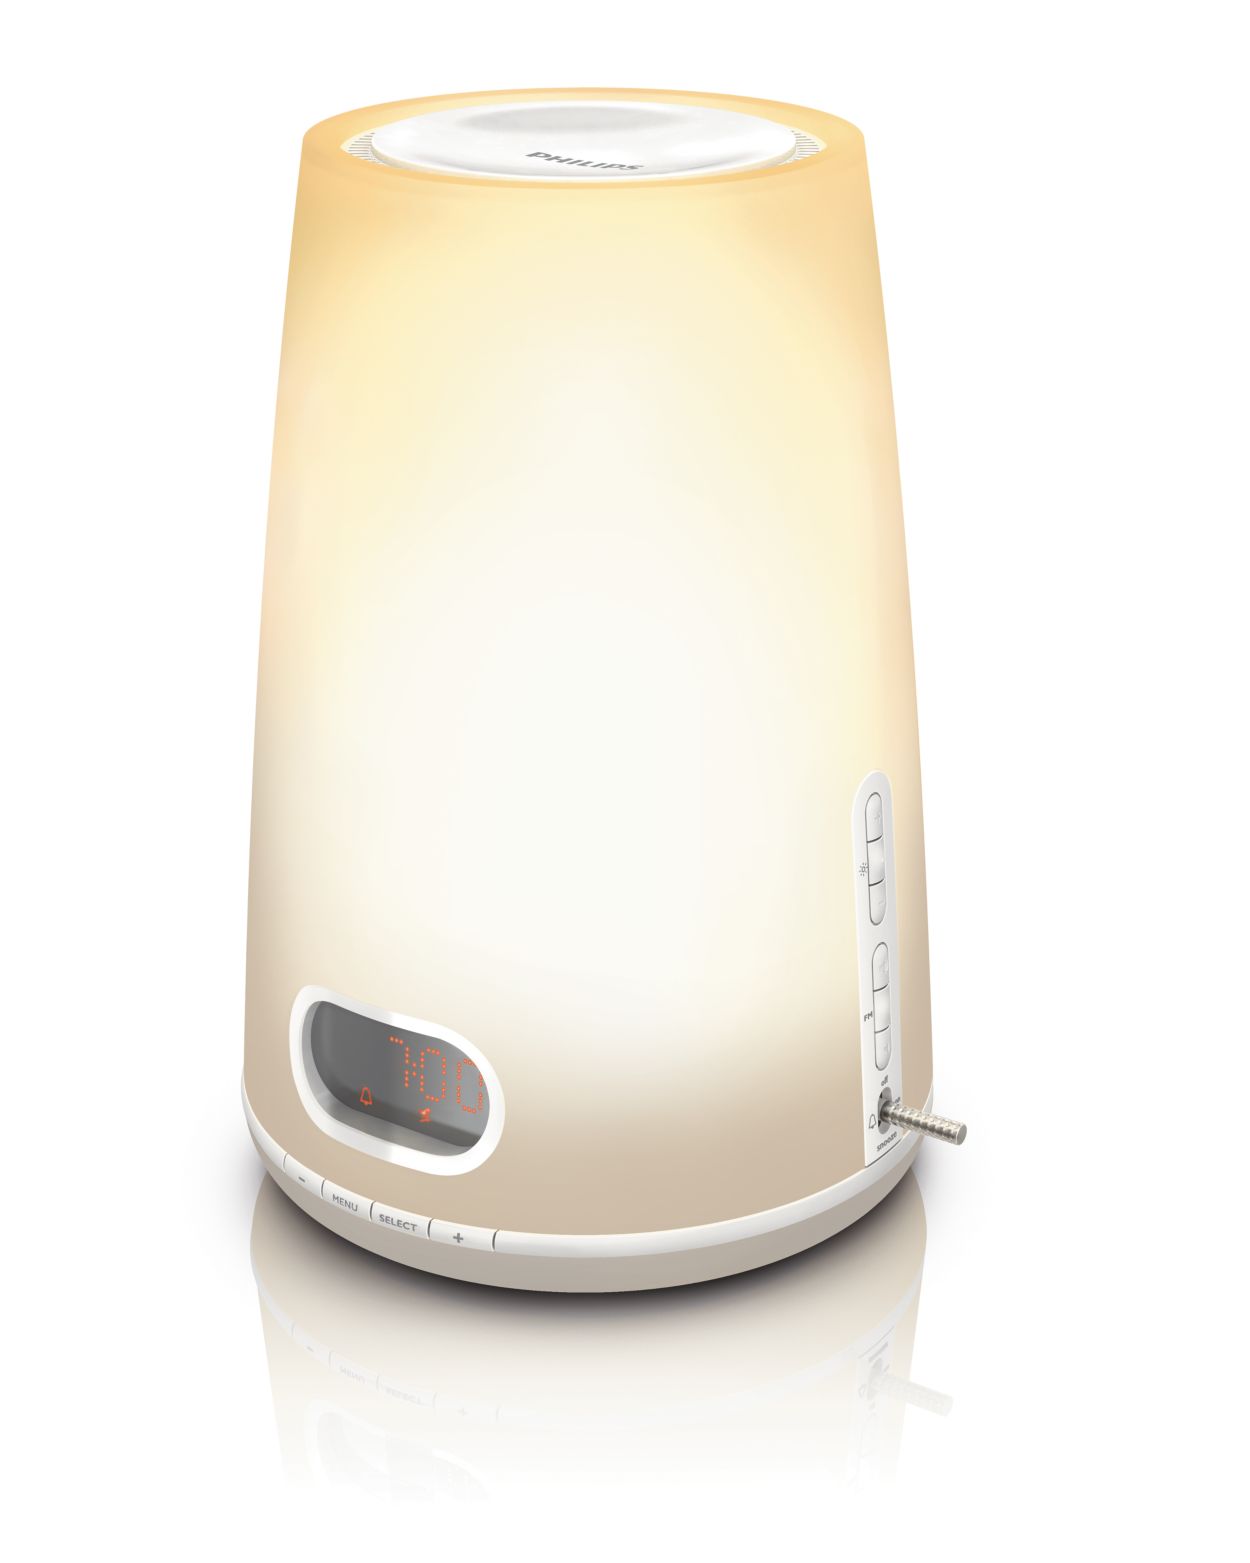 Philips Wake-up Light HF3470 specifications